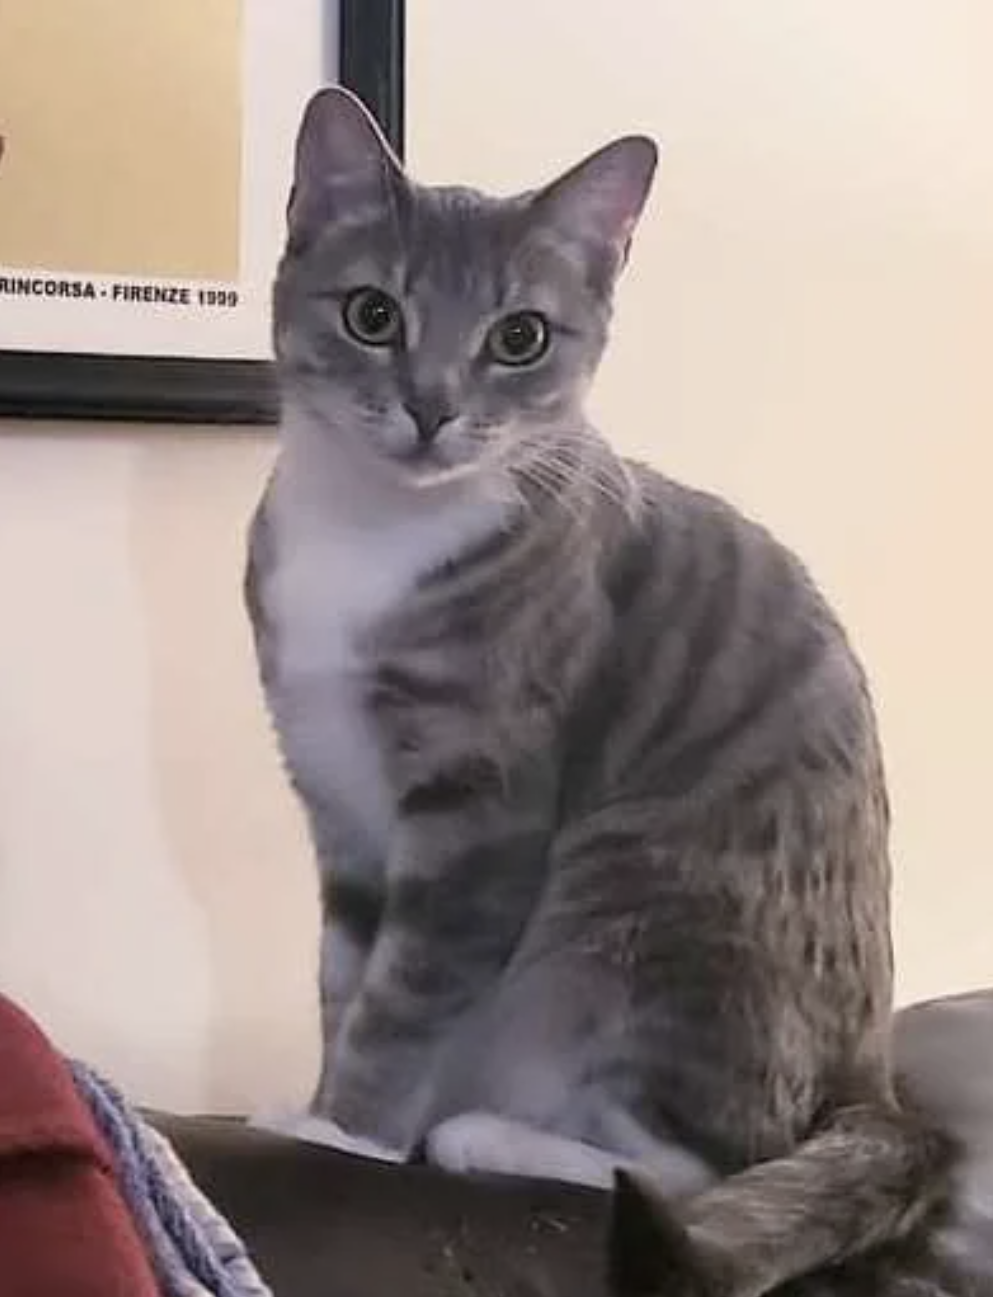 A gray tabby cat sitting, looking directly at the camera with a soft expression